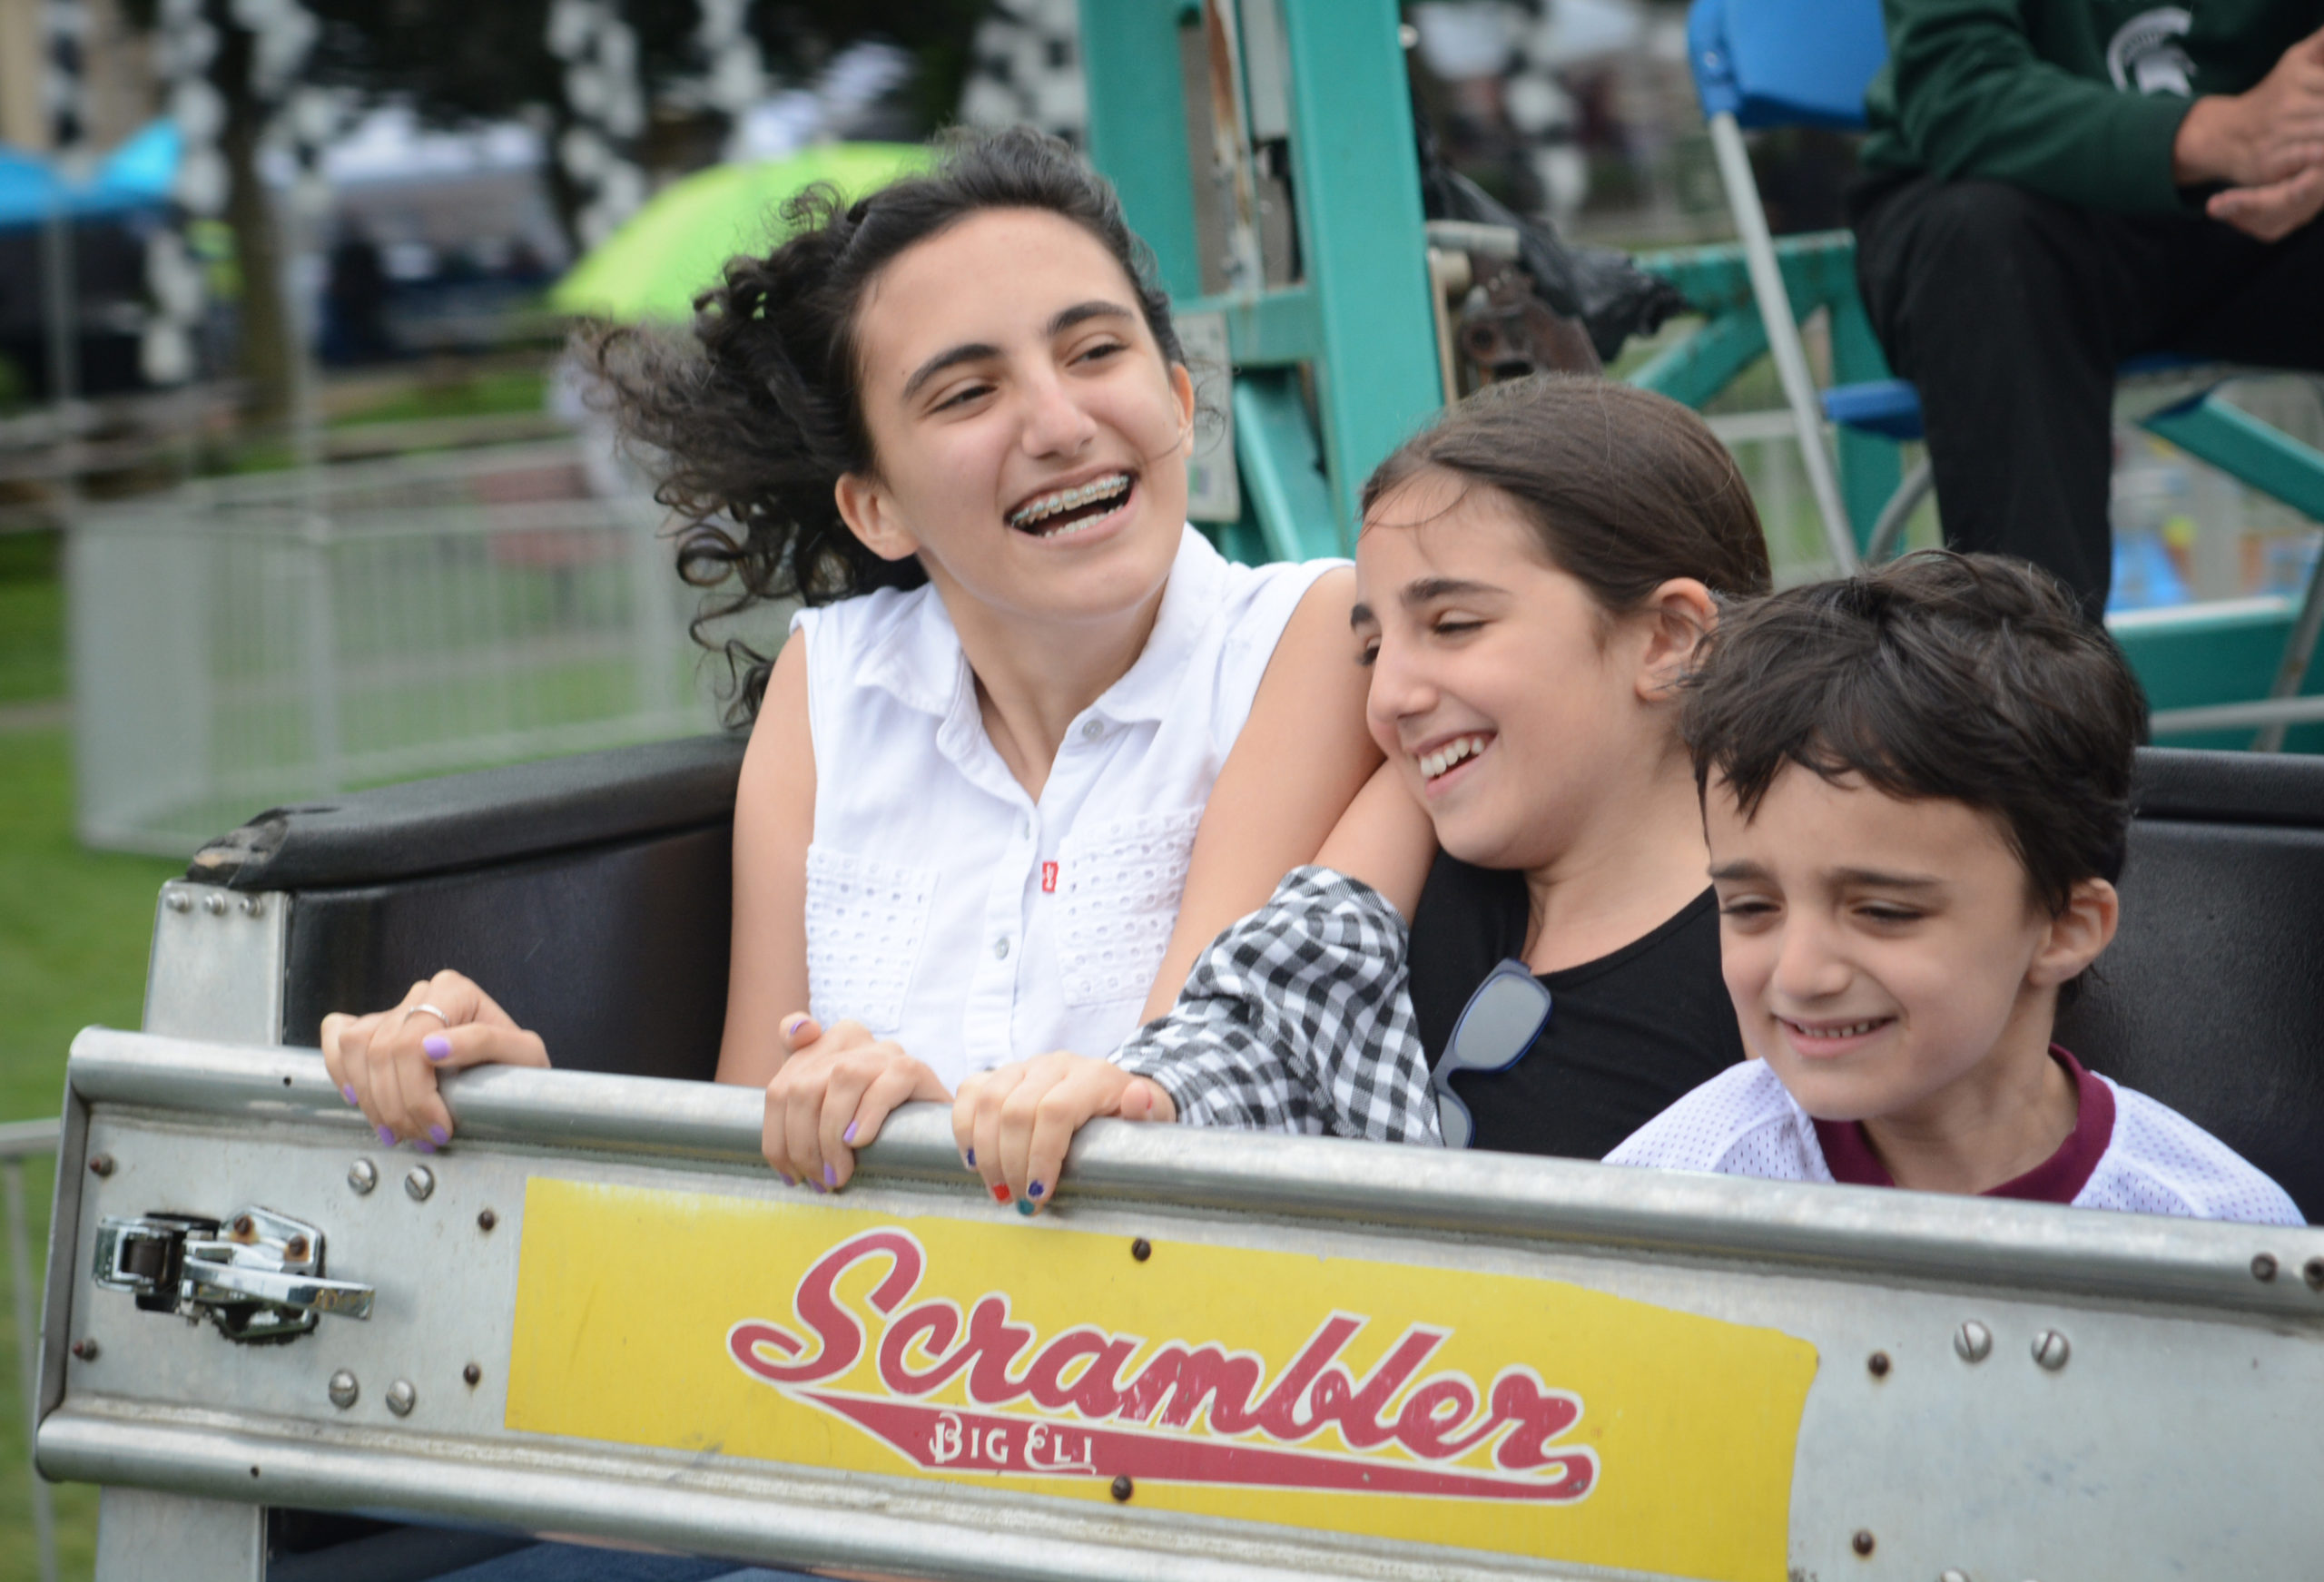 Dana, Sabrina and Kevin Levian, the grandchildren of Norman Namdar, enjoy a ride on the Scrambler at Village Green. (Photo by Janelle Clausen)